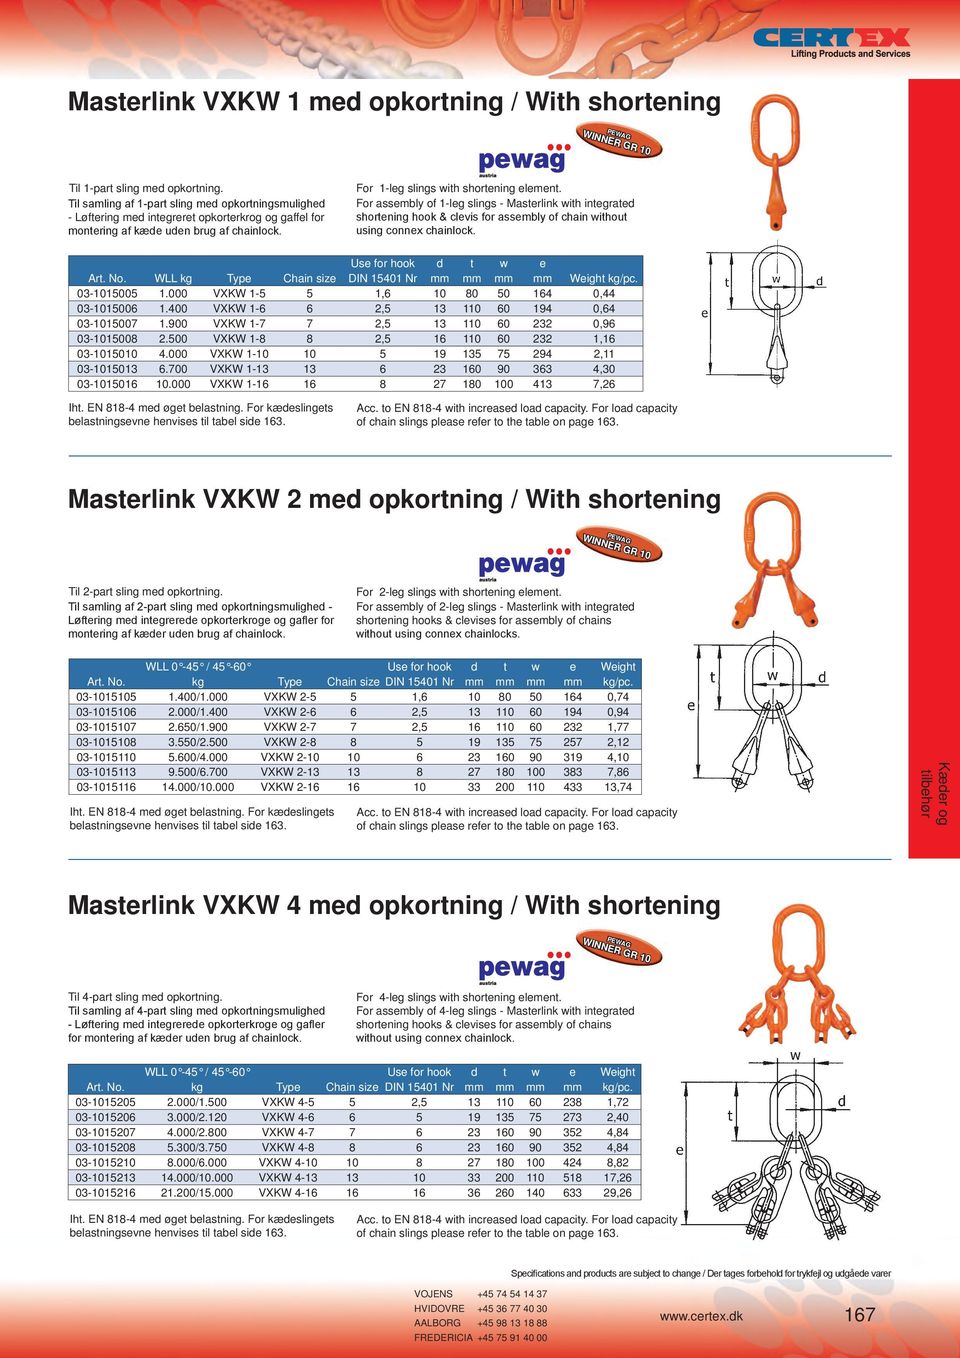 For assembly of 1-leg slings - Masterlink with integrated shortening hook & clevis for assembly of chain without using connex chainlock. Use for hook d t w e Art. No.